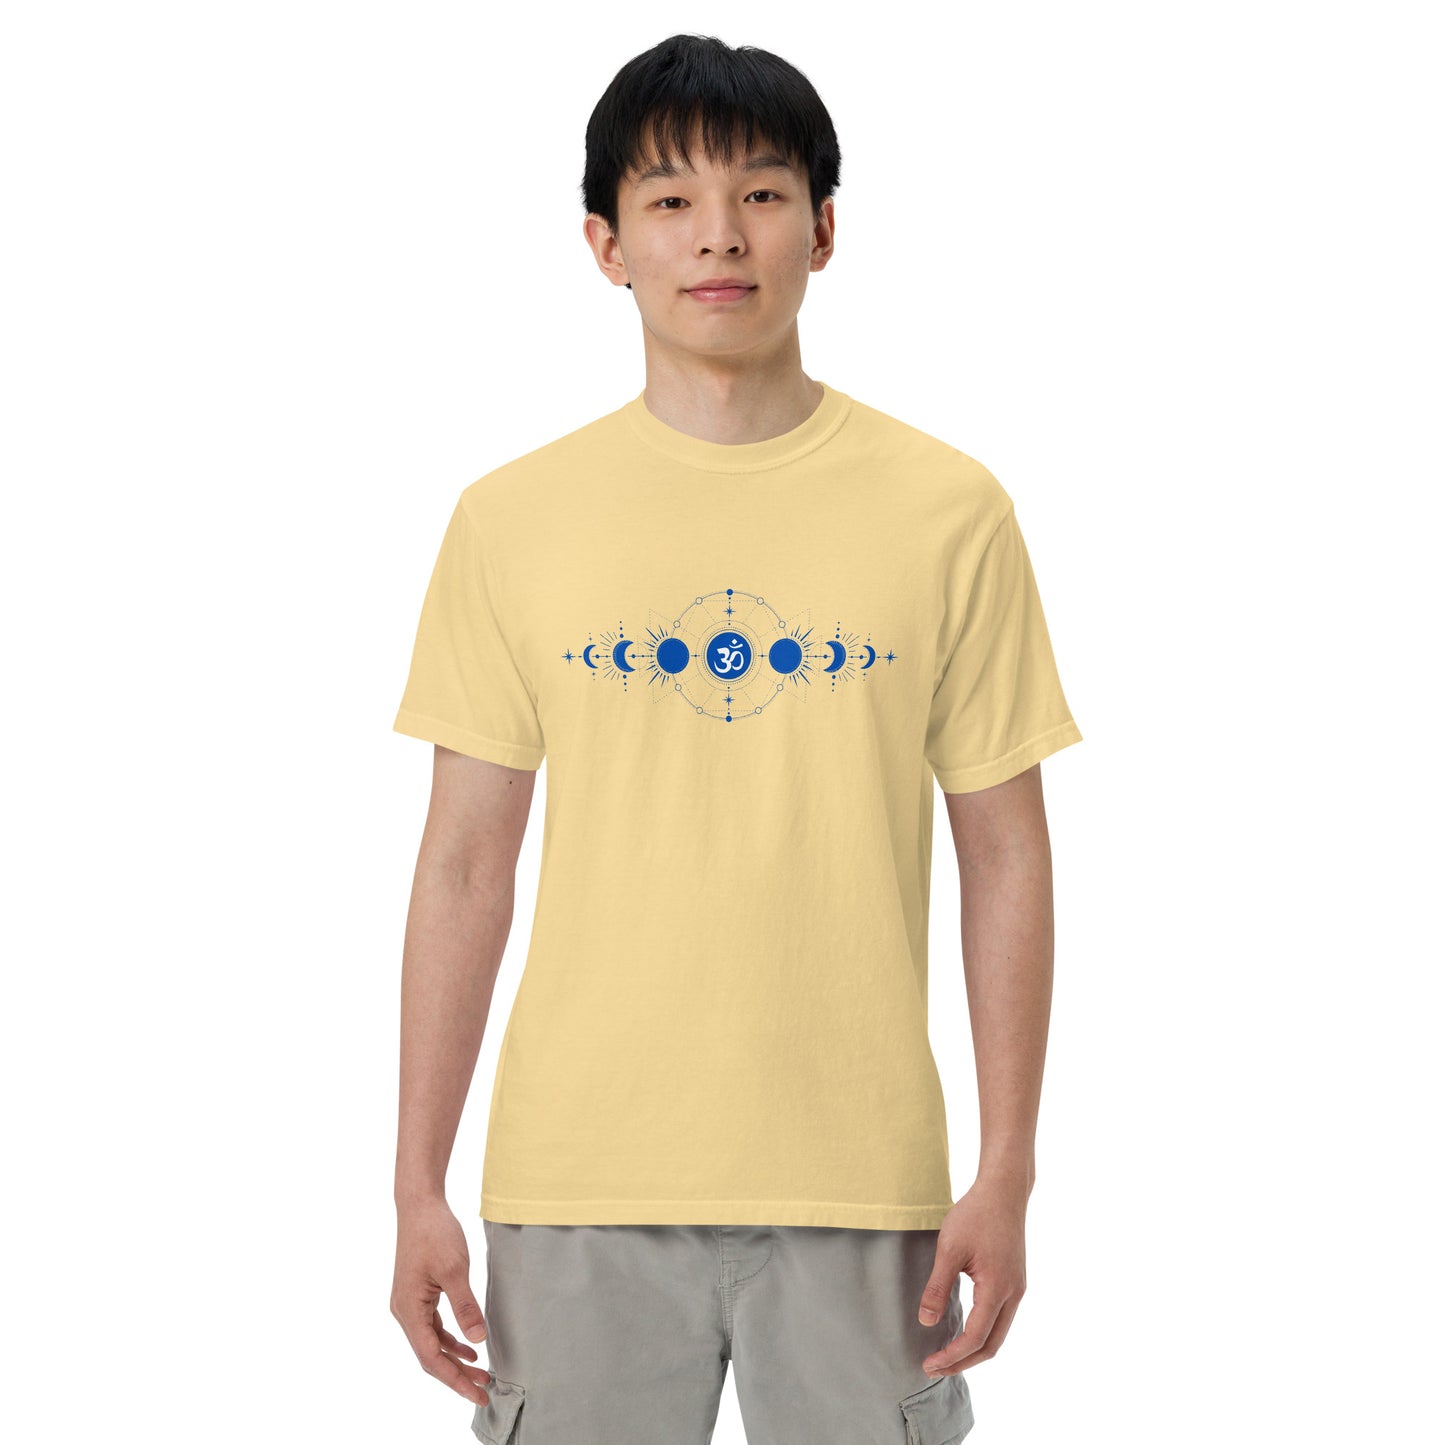 enlightened Moon Phases Men’s garment-dyed heavyweight t-shirt